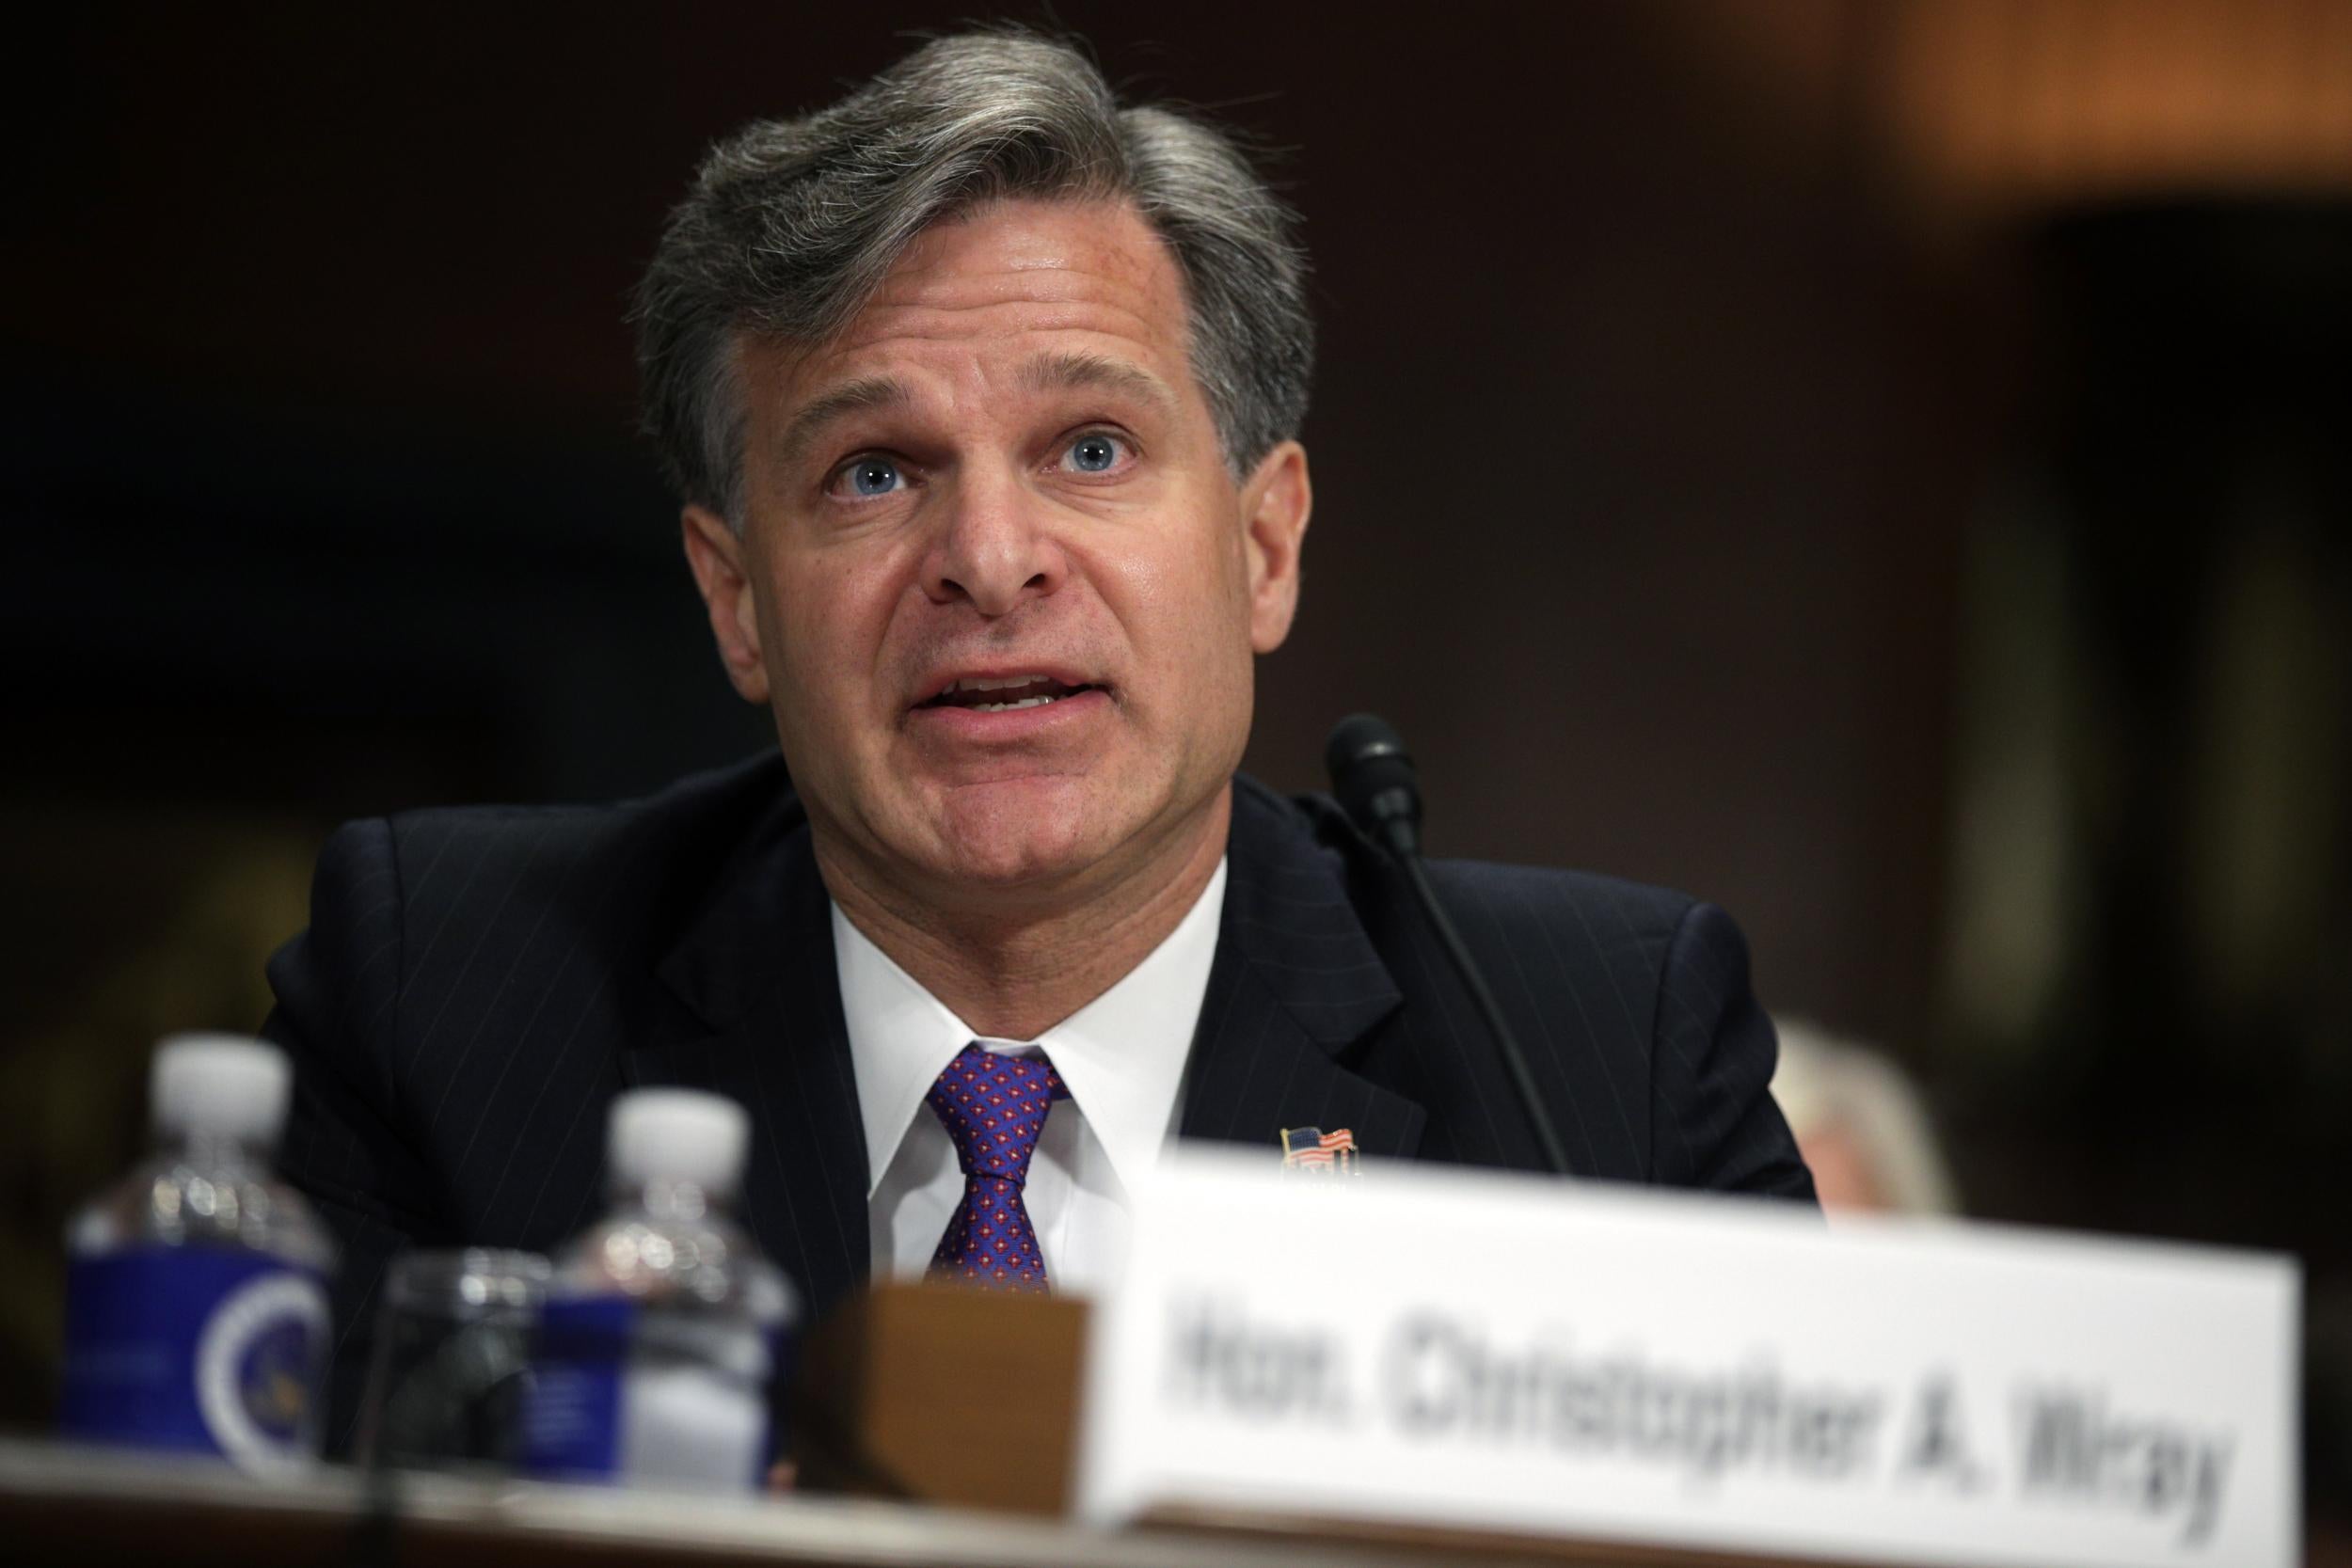 FBI director nominee Christopher Wray testifies during his confirmation hearing before the Senate Judiciary Committee